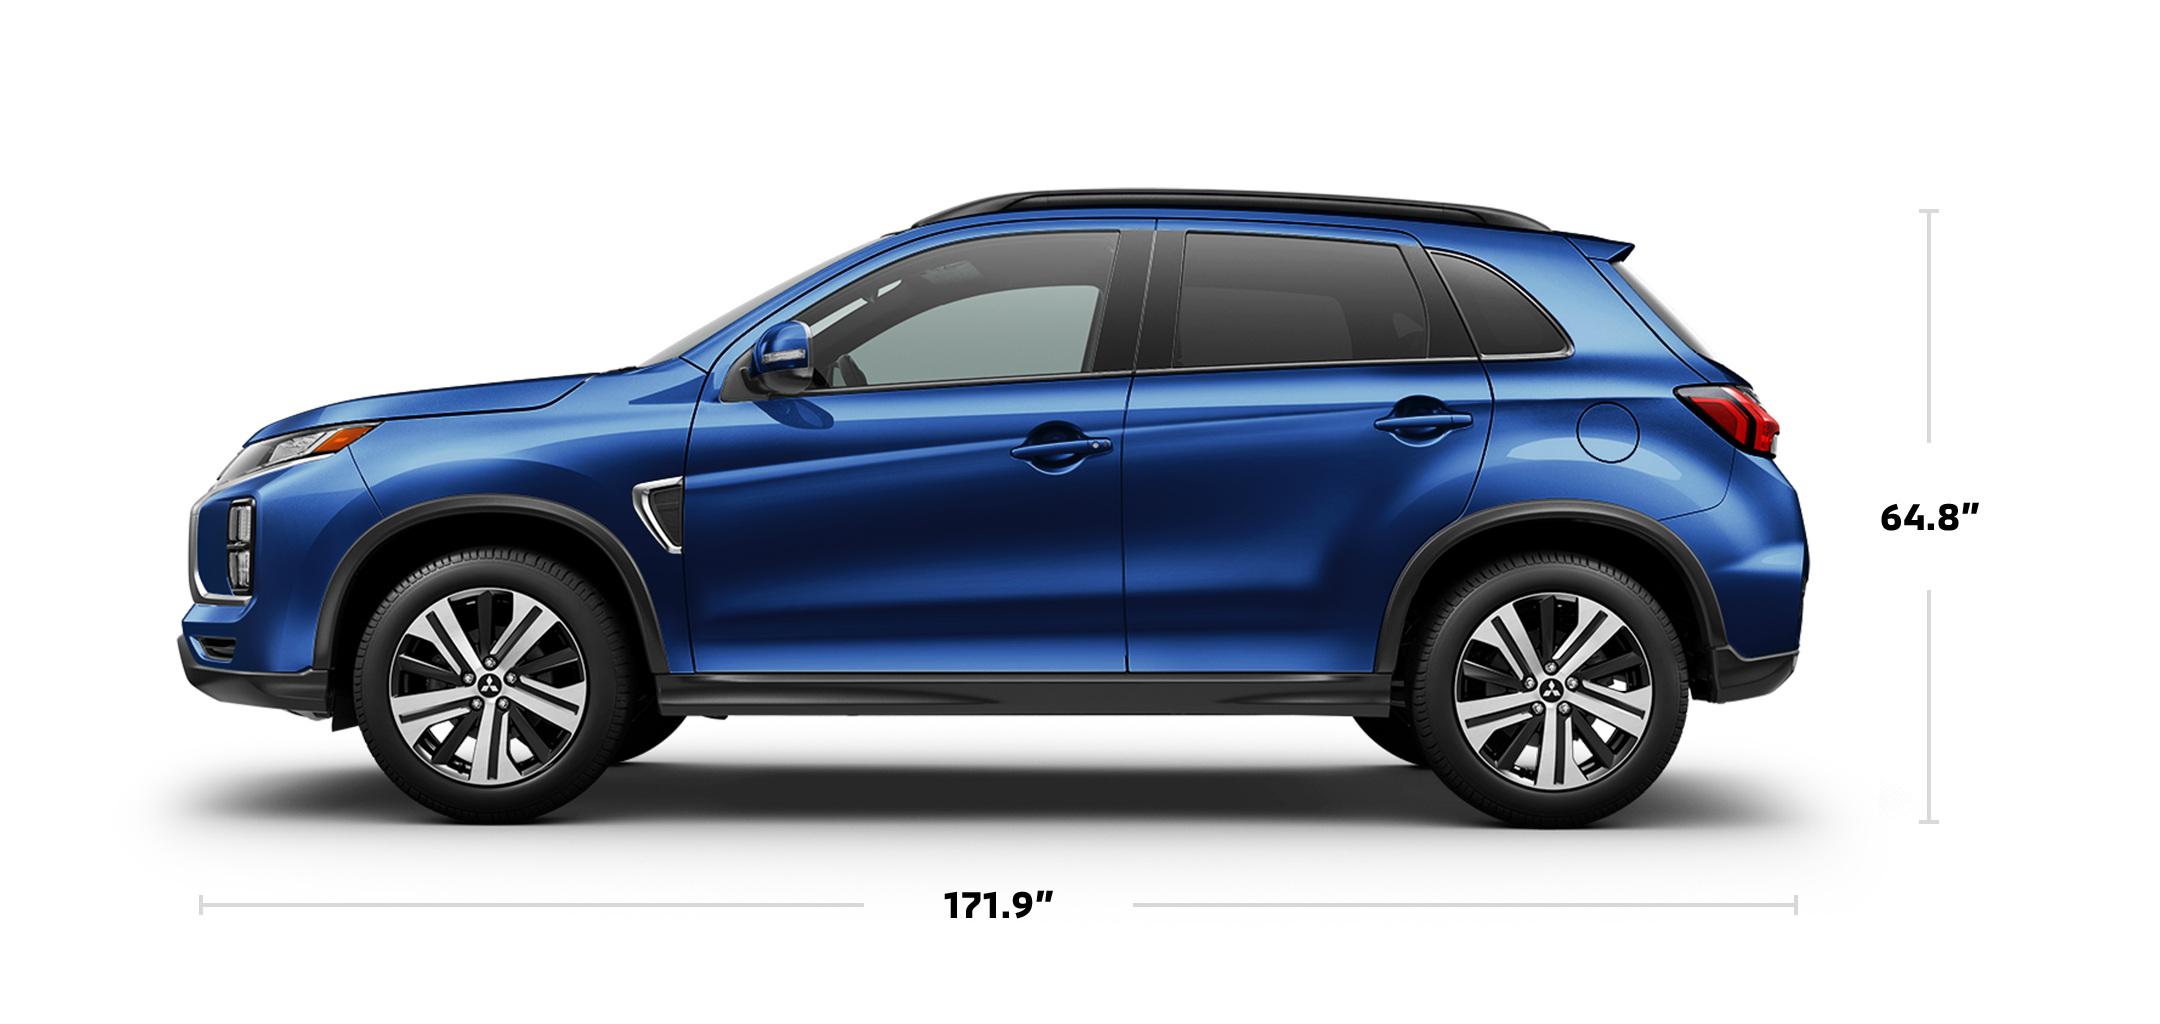 Side profile of a blue 2023 Mitsubishi Outlander Sport SUV with dimensions information